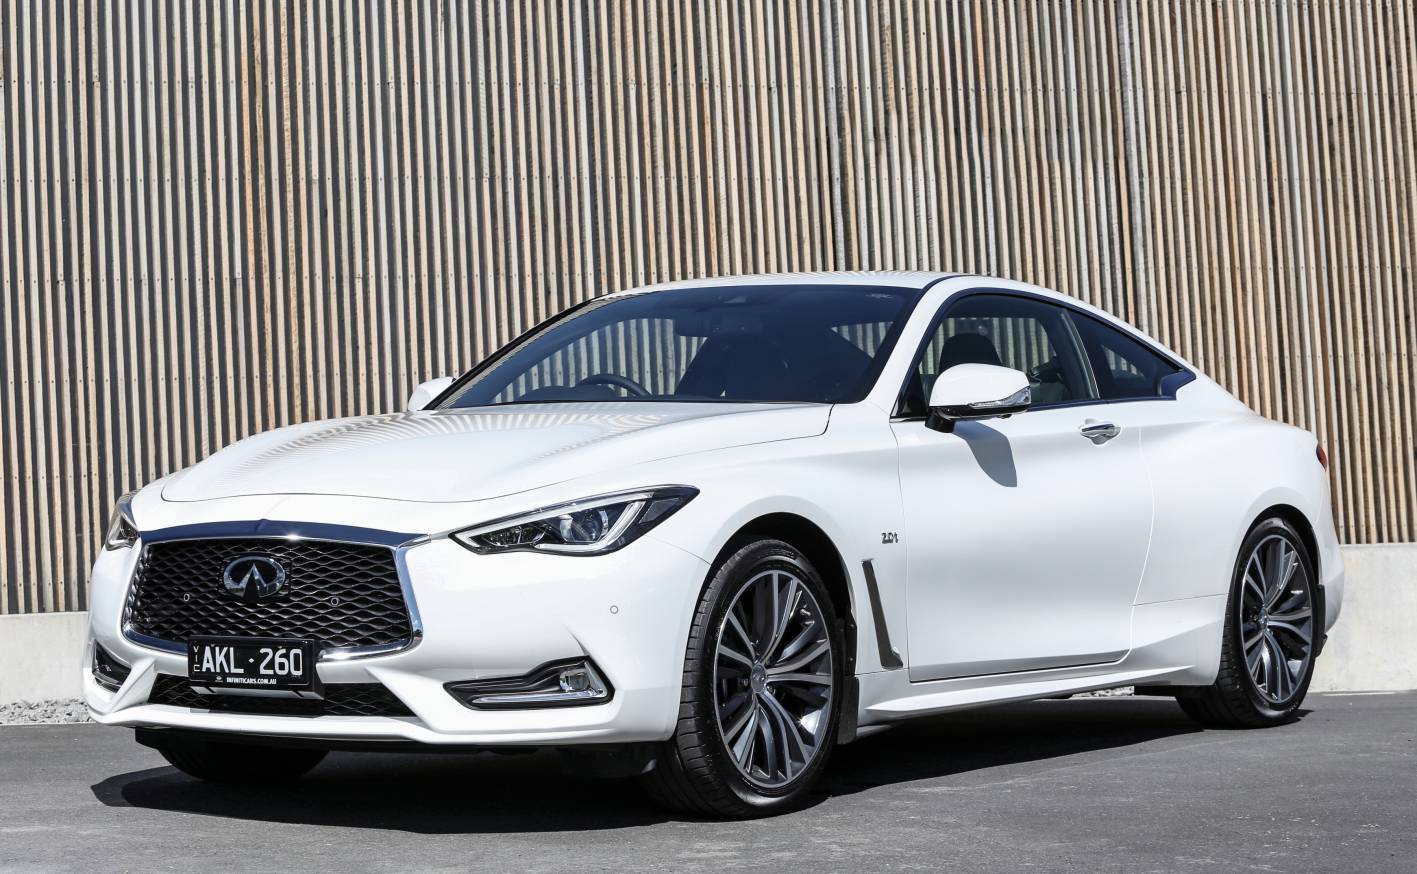 All-new 2017 Infiniti Q60 checks in from $62,900 - ForceGT.com1417 x 874